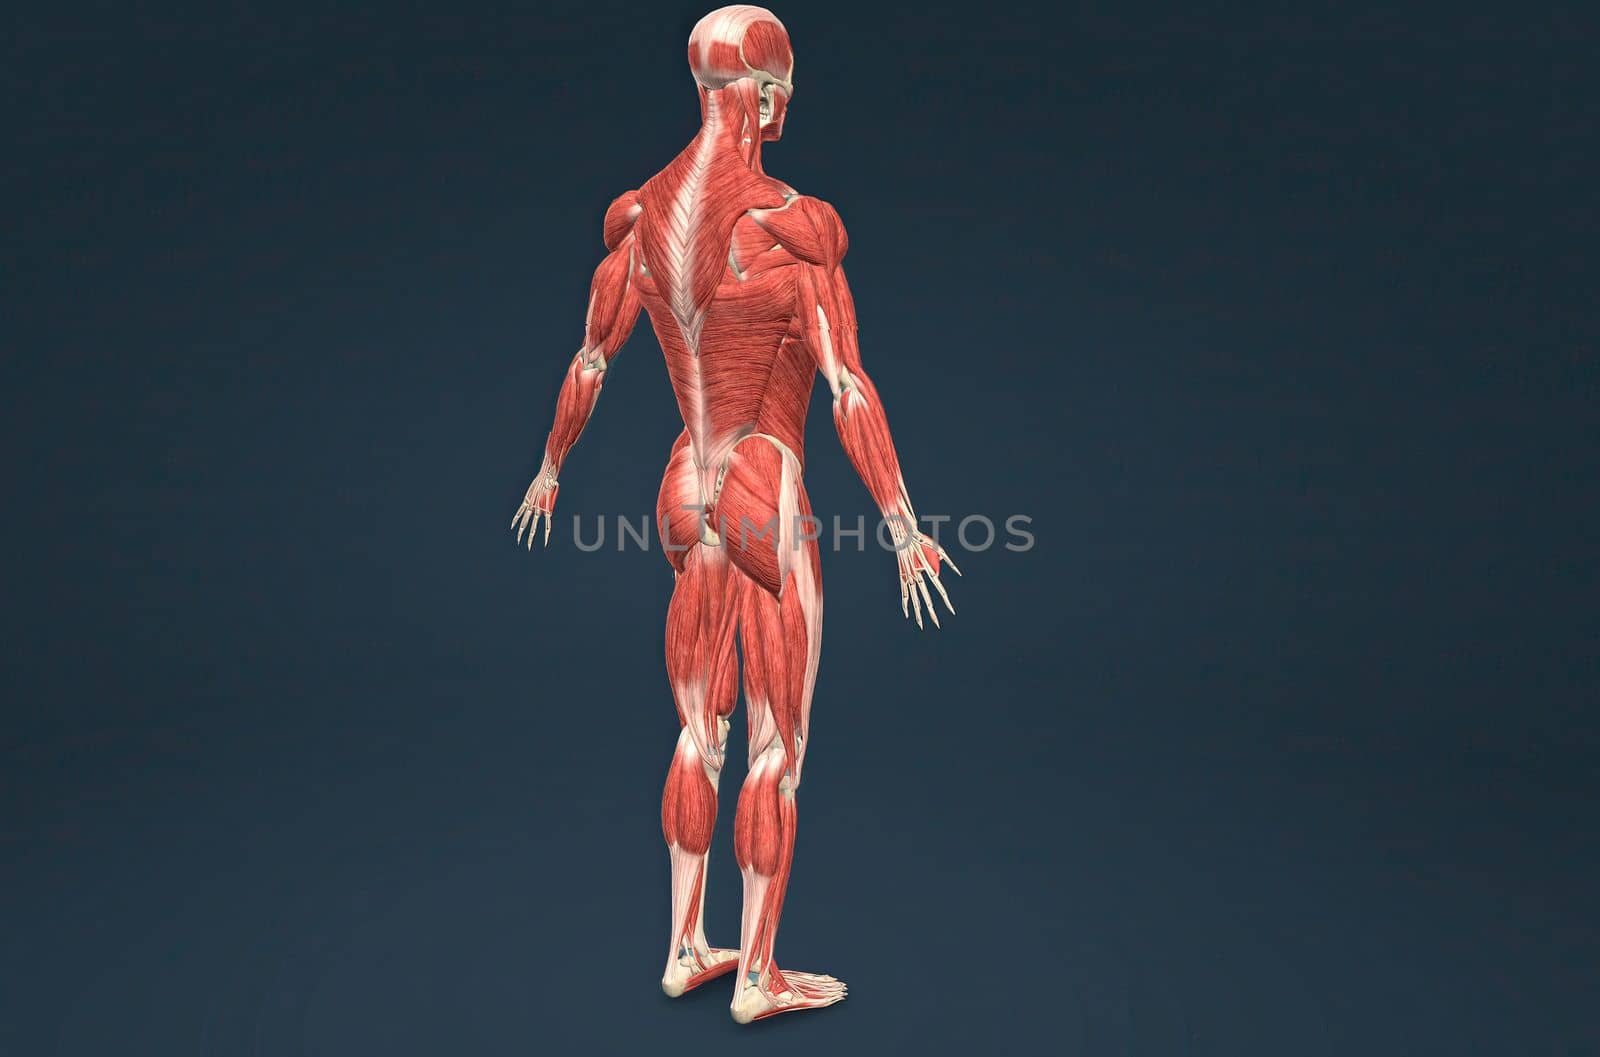 Male human muscular system anatomy 3D illustration